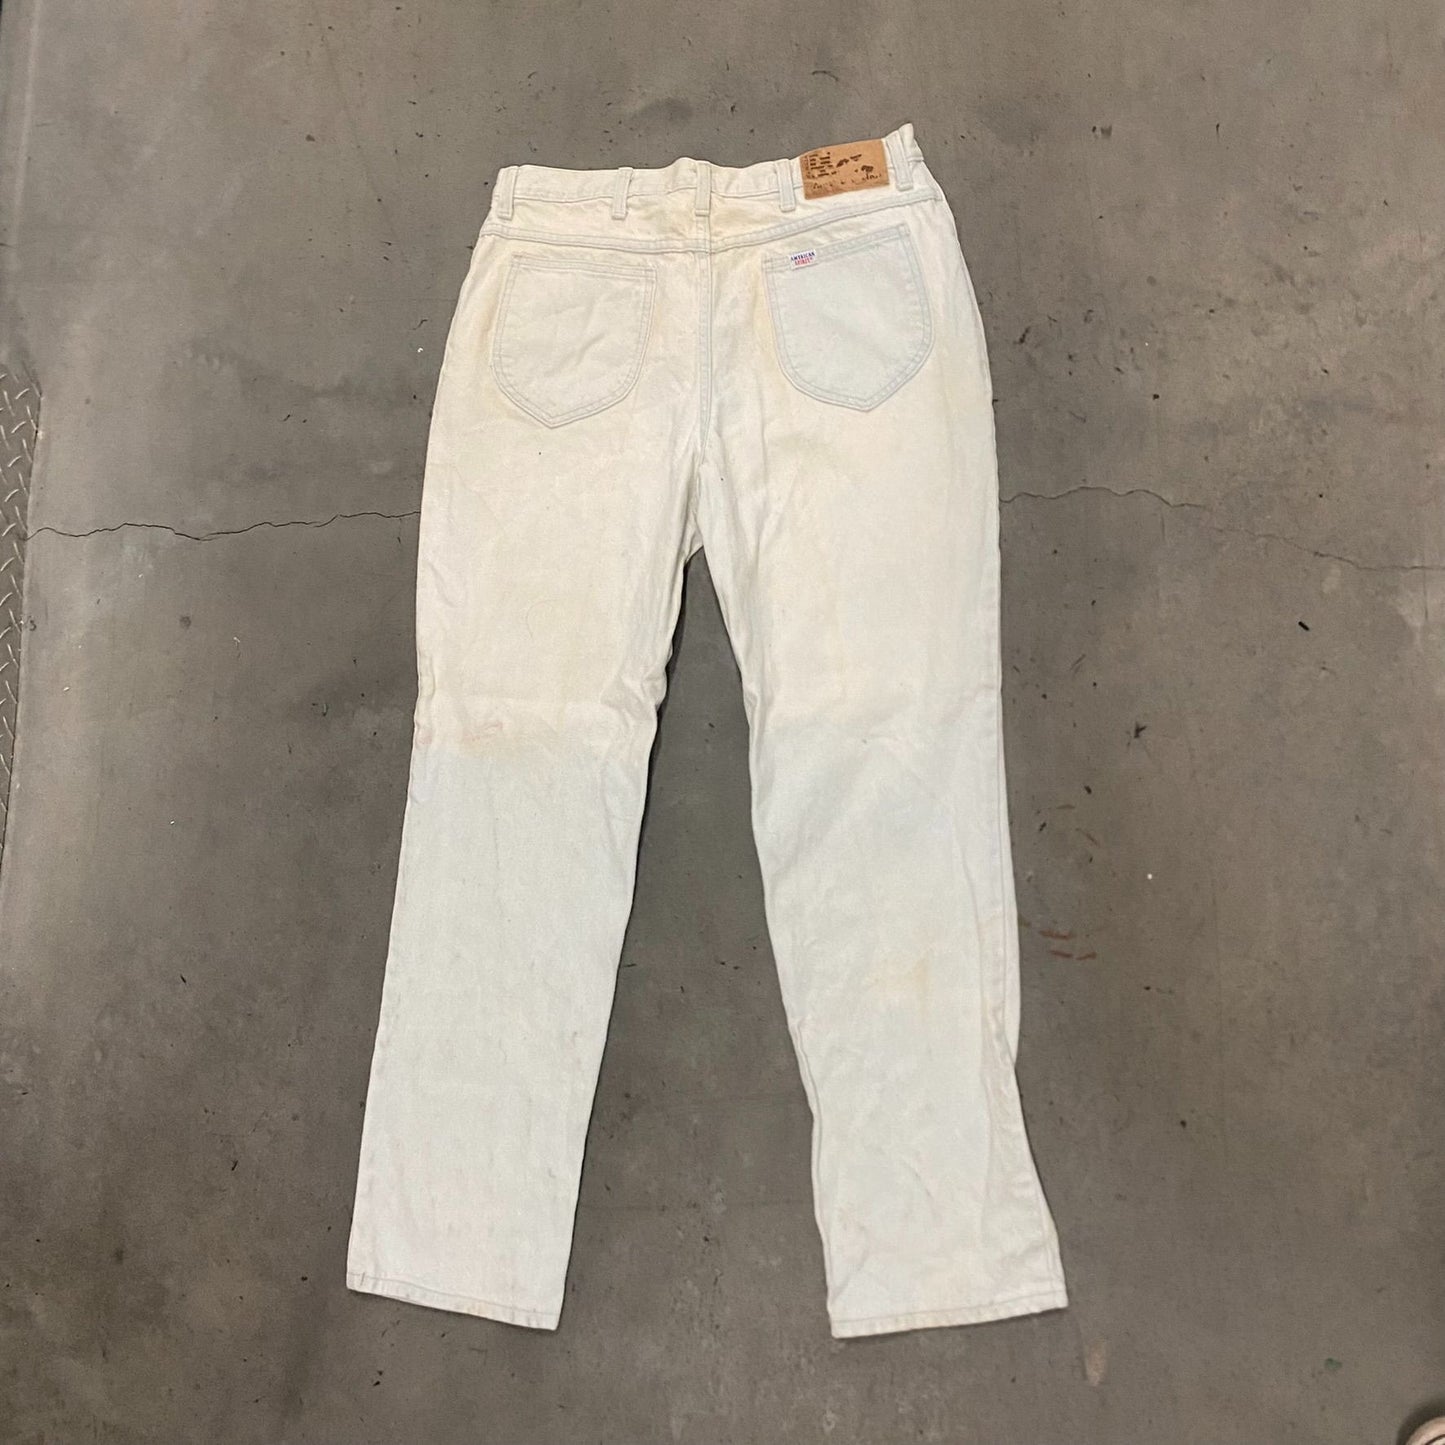 Vintage 90s White Denim Essential Relaxed Work Baggy Jeans